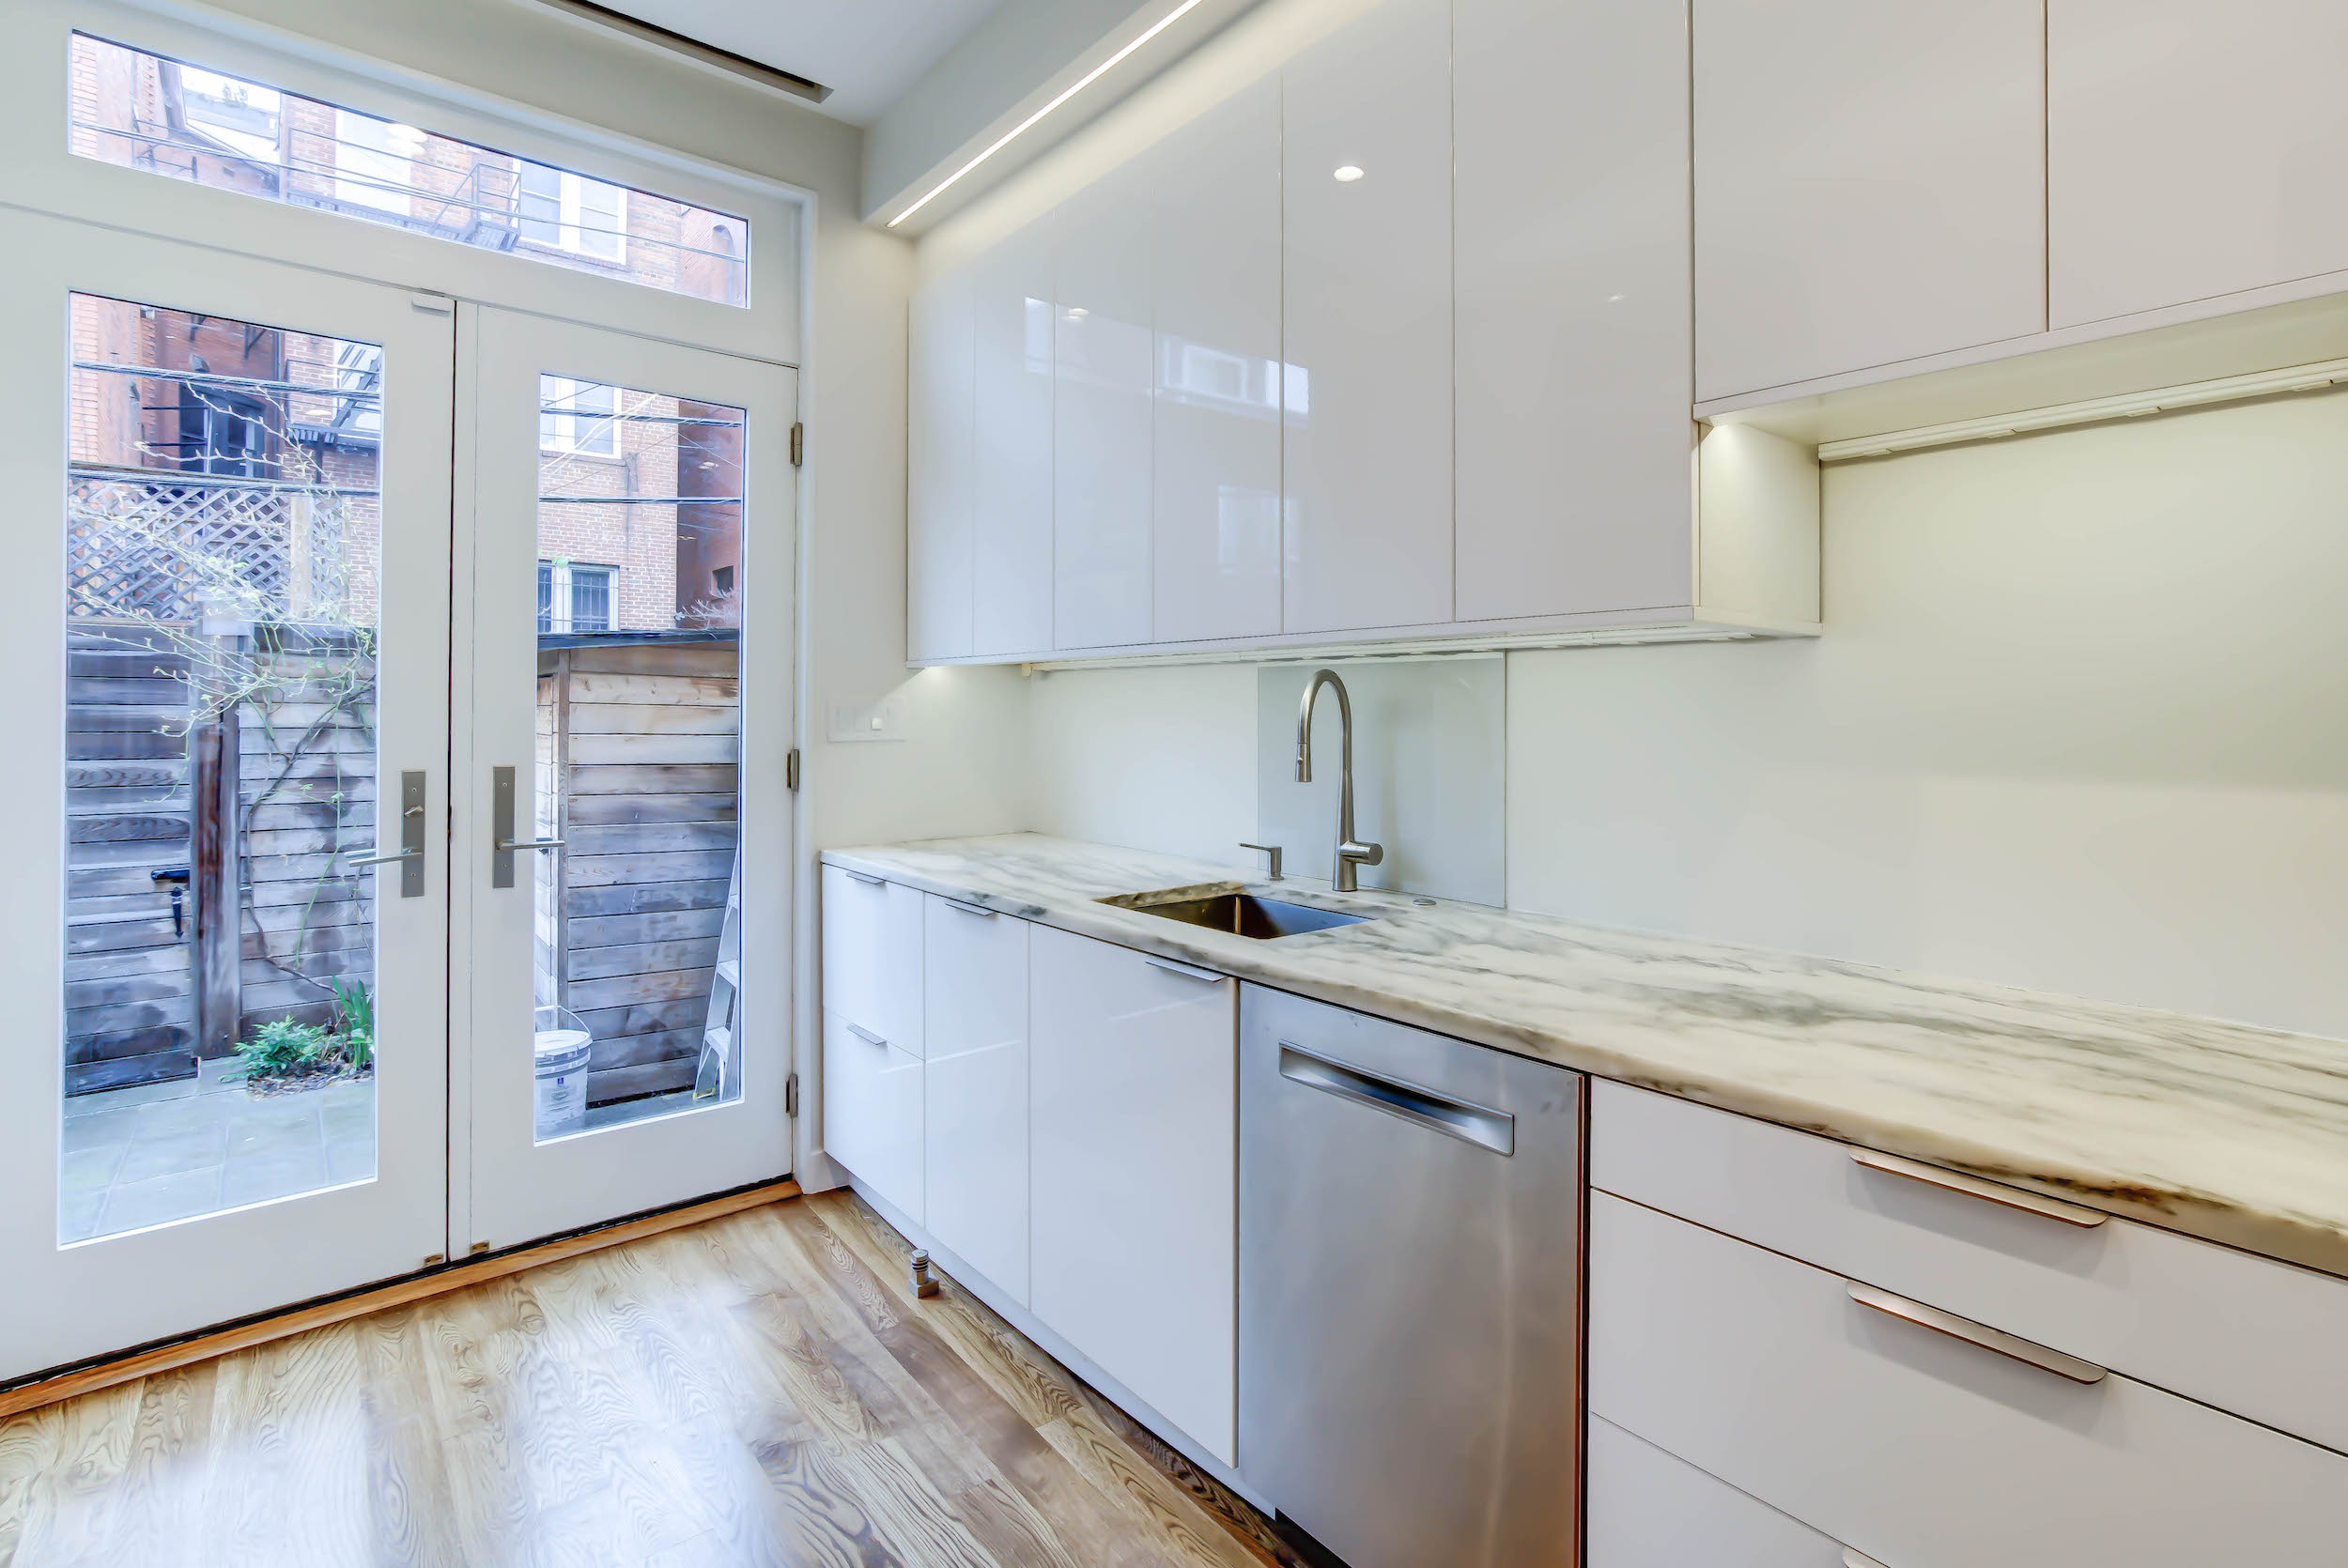 How to Prioritize Space When Remodeling Your Kitchen